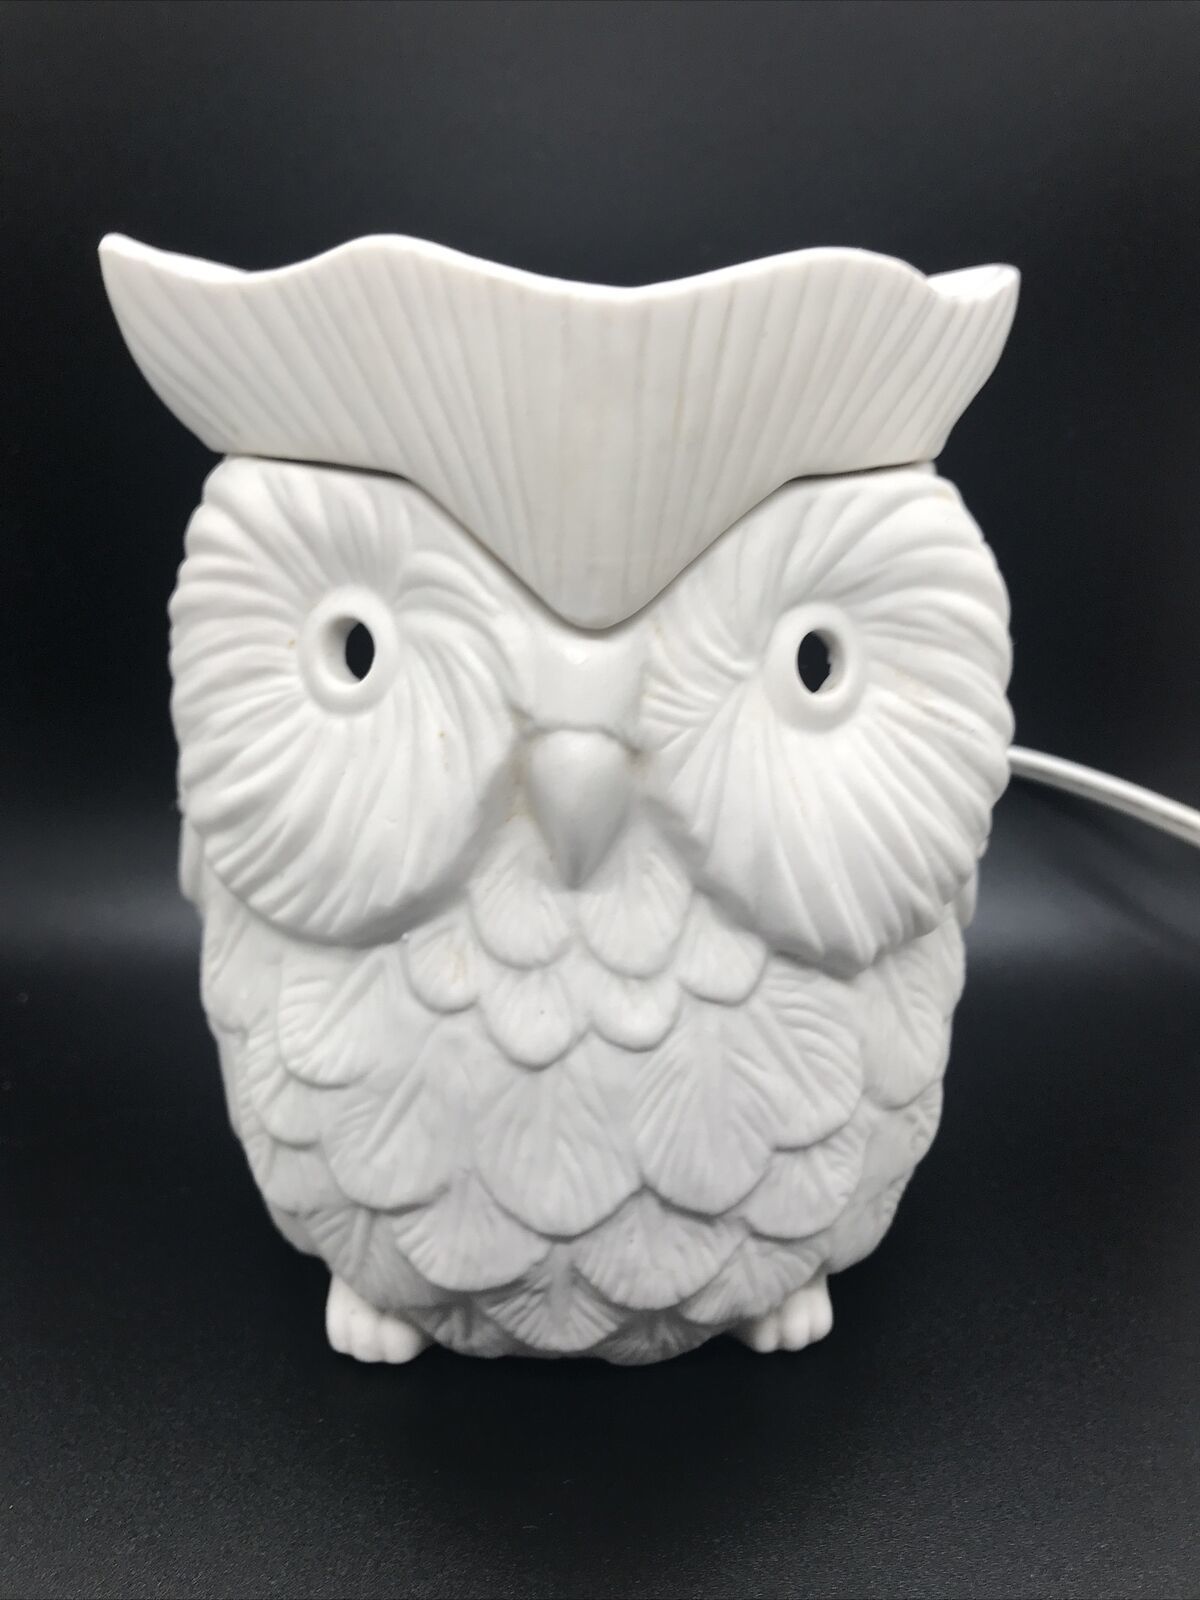 Scentsy “WHOOT” Owl  Full-size Candle Wax Warmer No Box Discontinued - $24.99